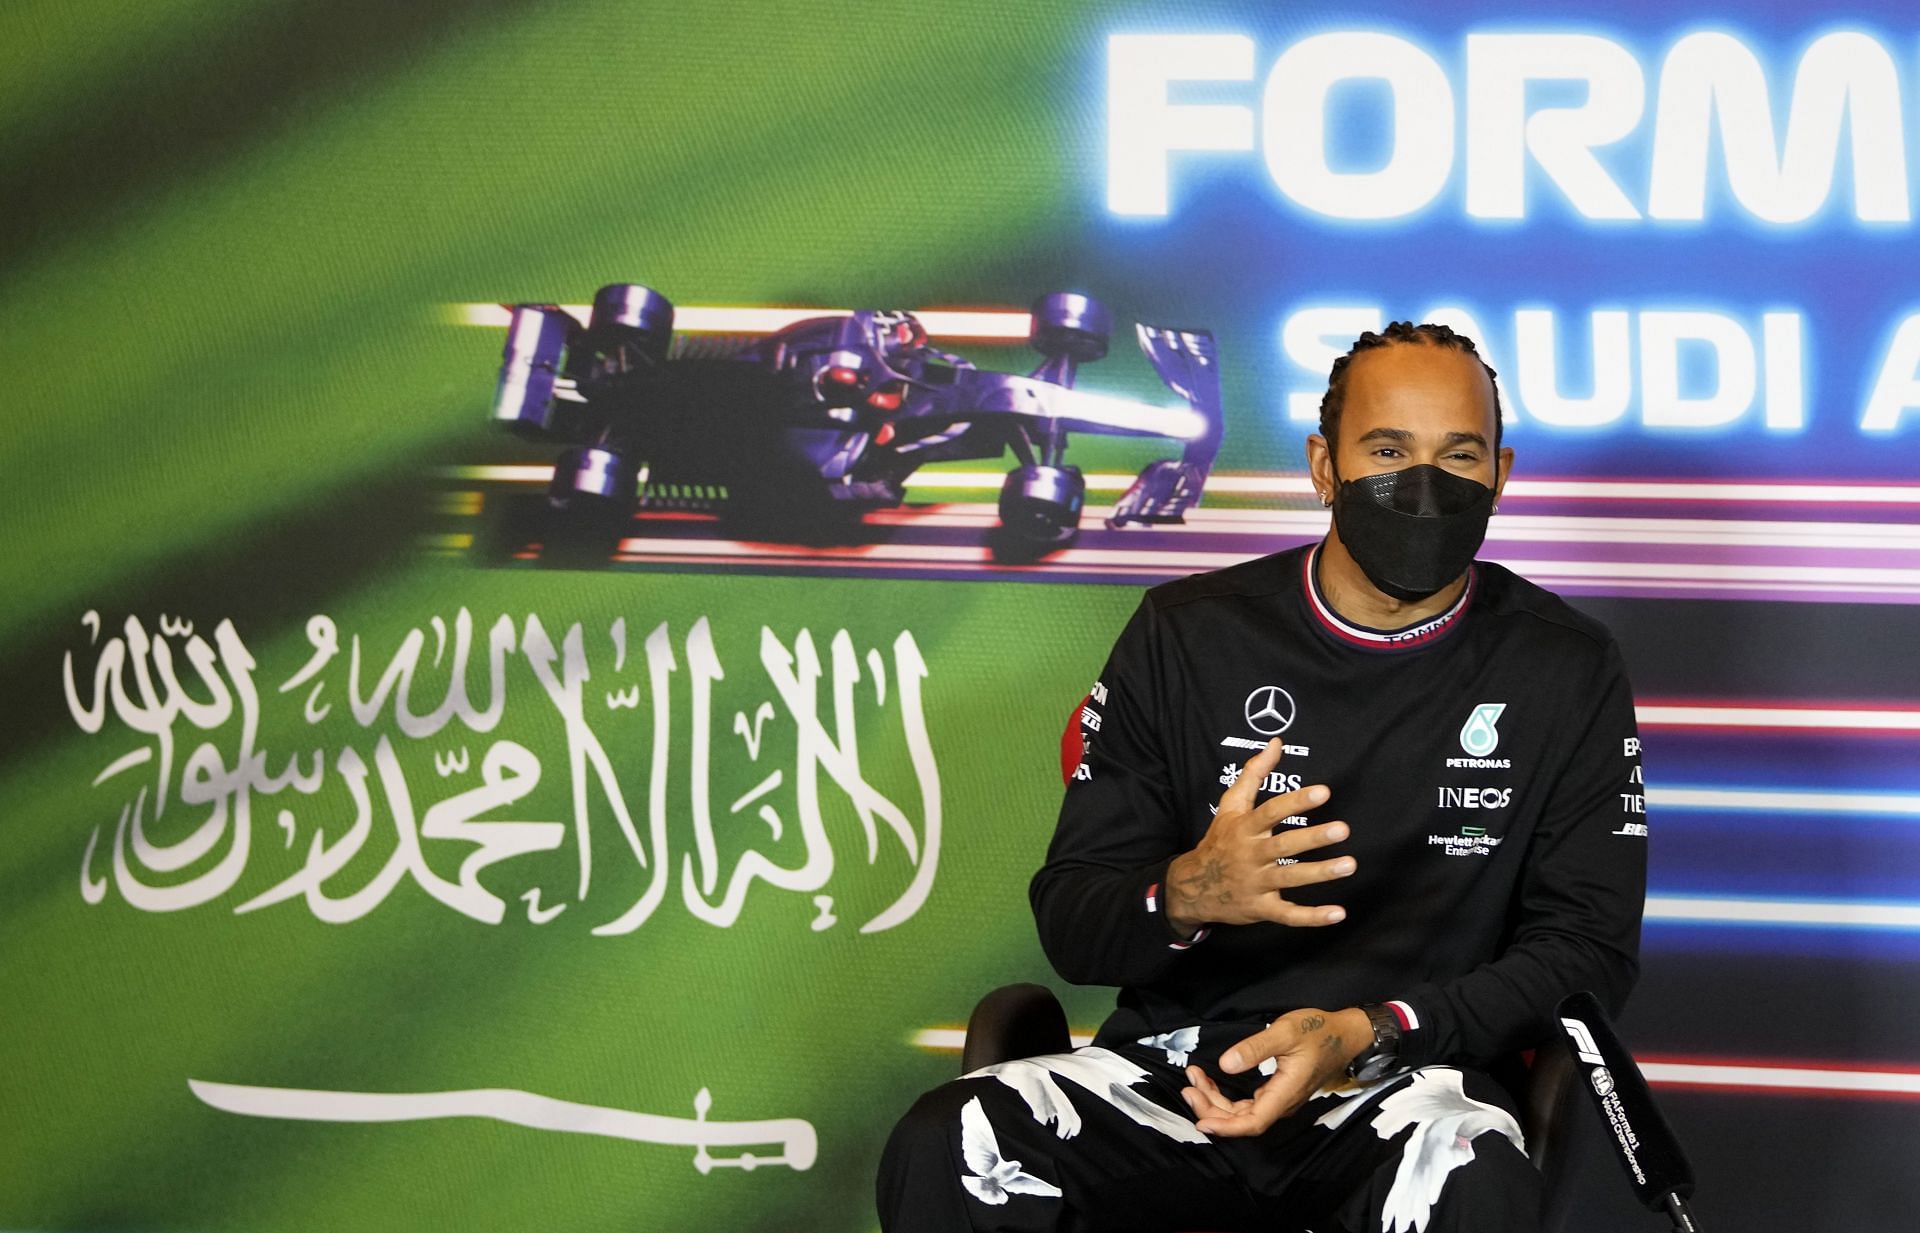 Lewis Hamilton talks in the Drivers Press Conference during previews ahead of the 2021 Saudi Arabia GP. (Photo by Hassan Ammar - Pool/Getty Images)